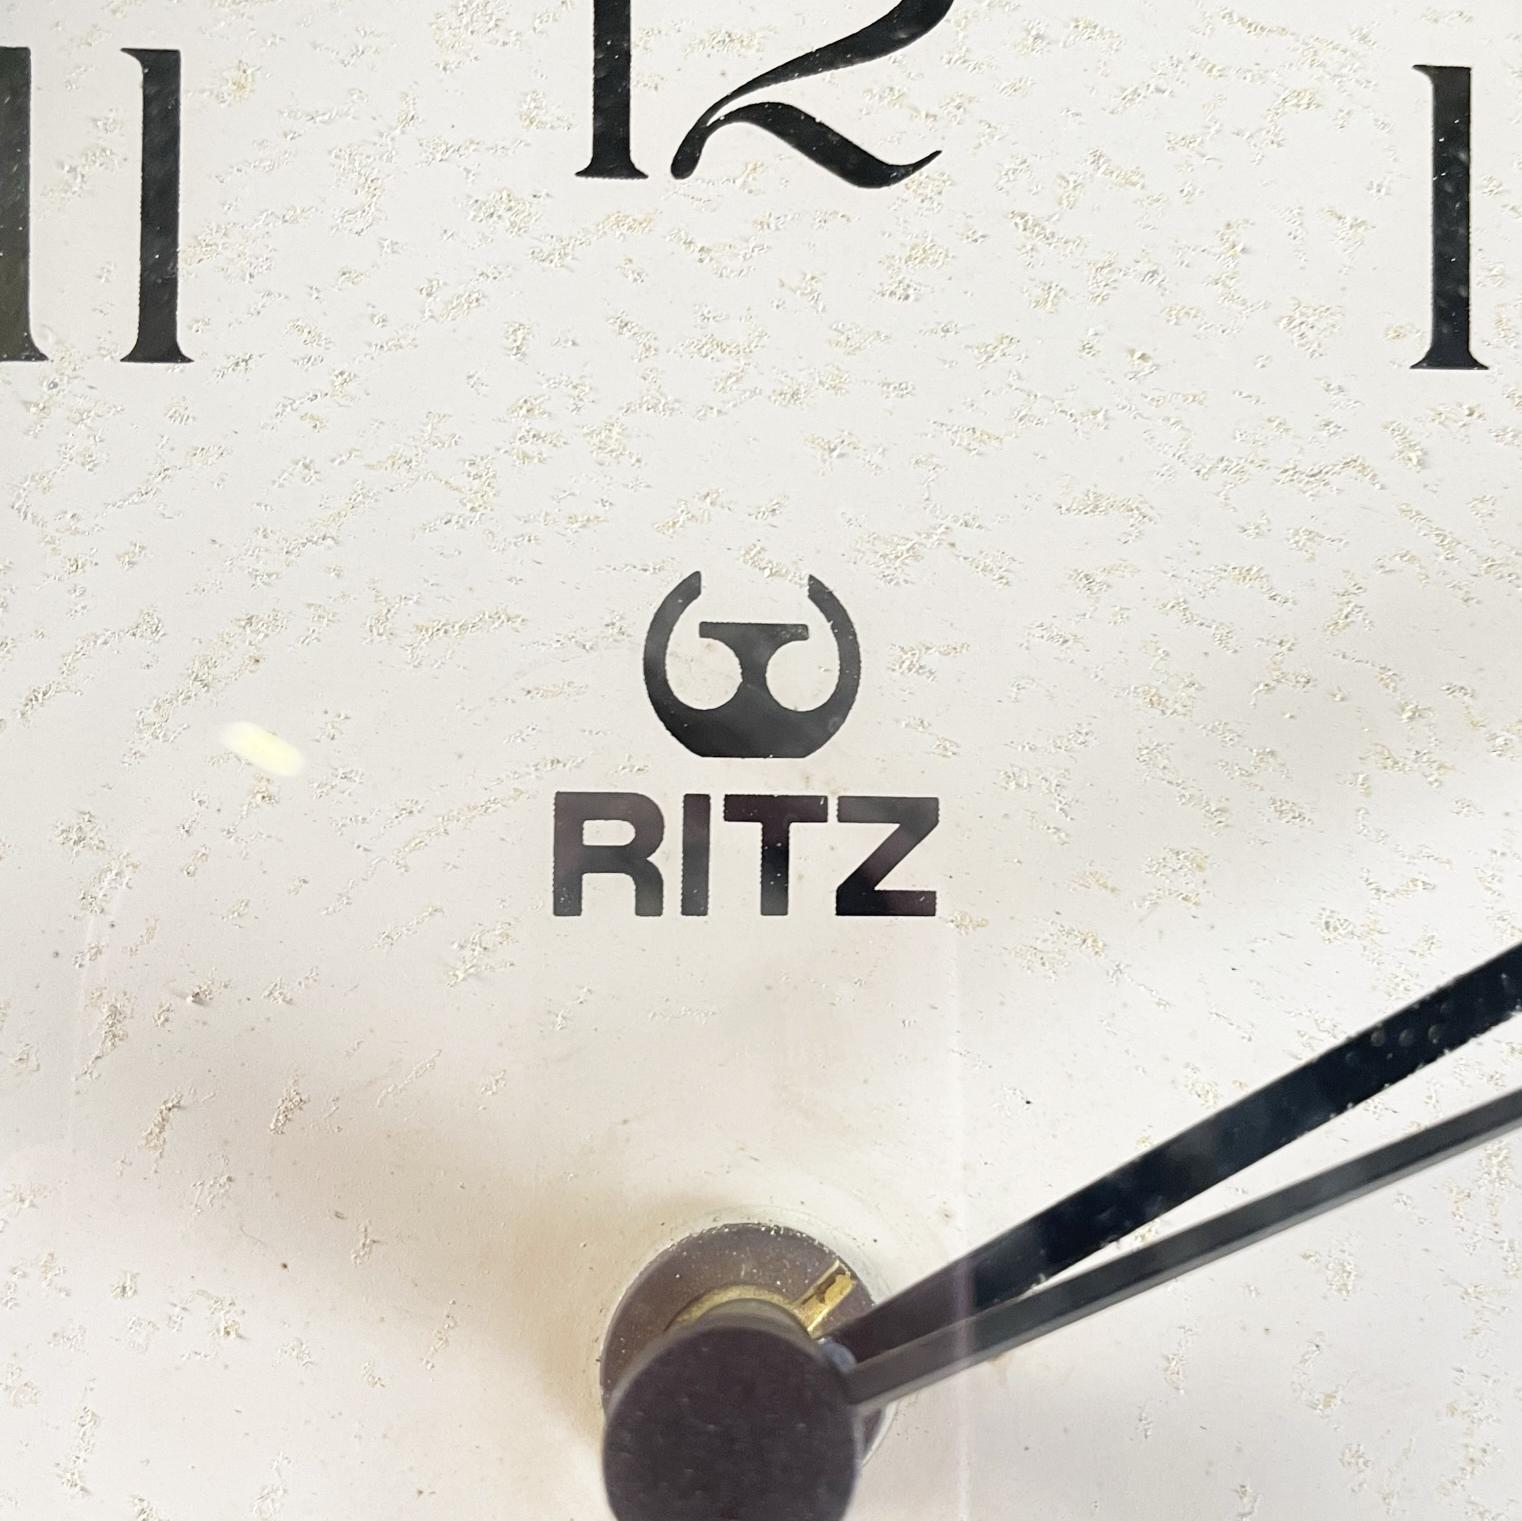 Mid-20th Century Italian modern Wall clock in gold and orange wood and metal by Ritz, 1960s